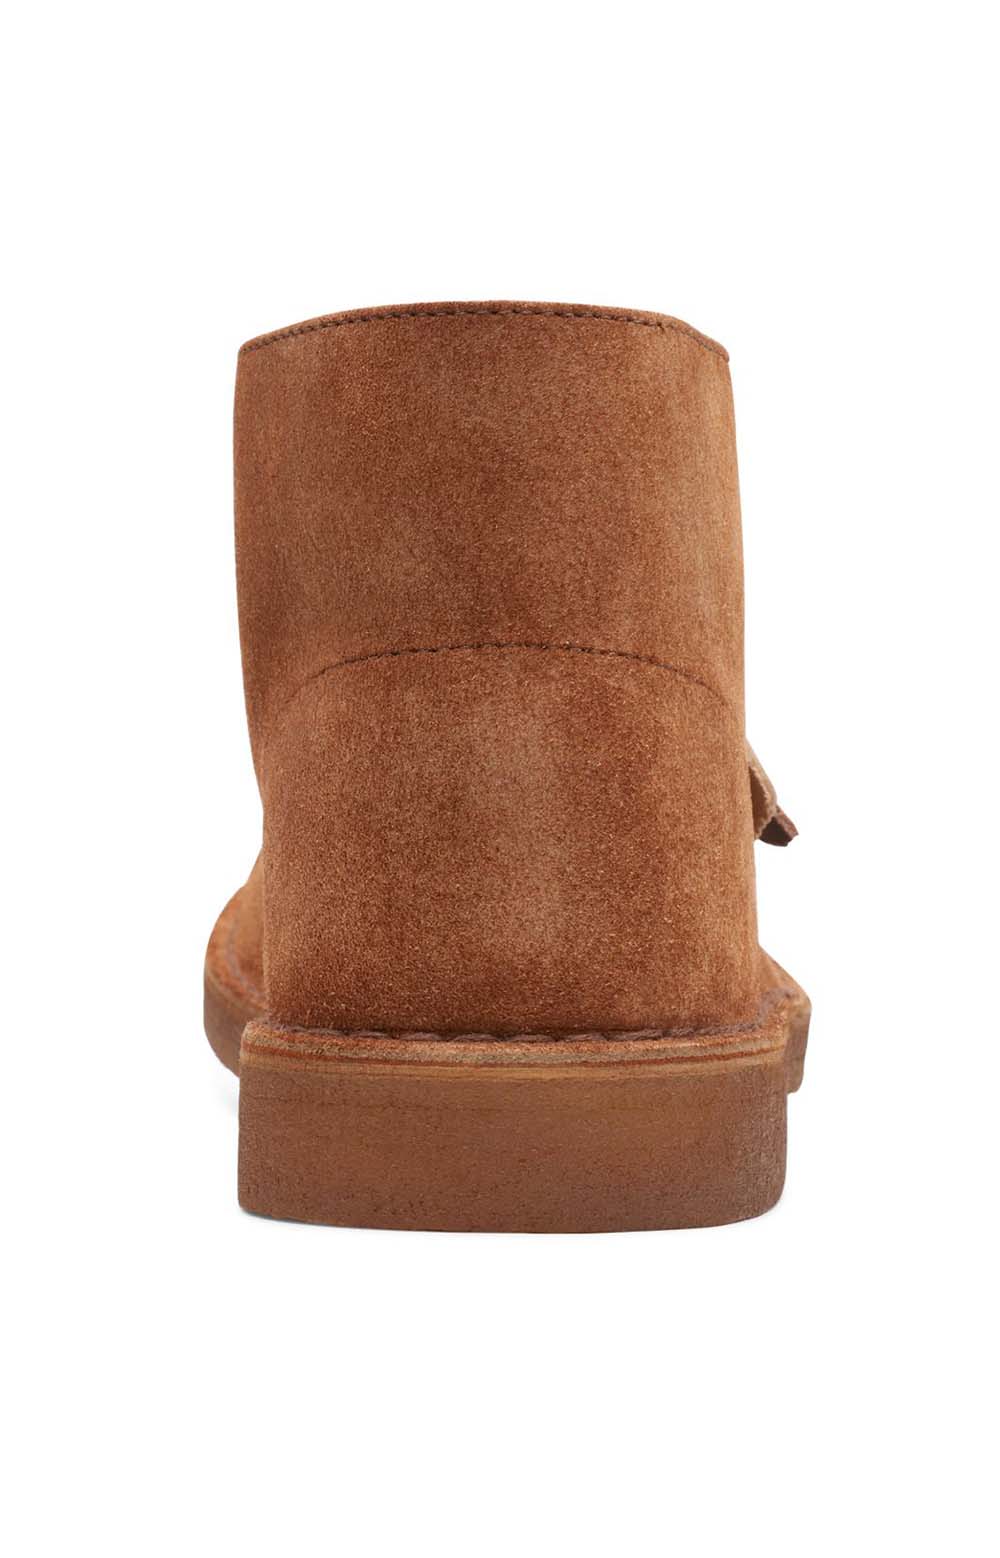 (26168531) Desert Boots - Ginger Hairy Suede